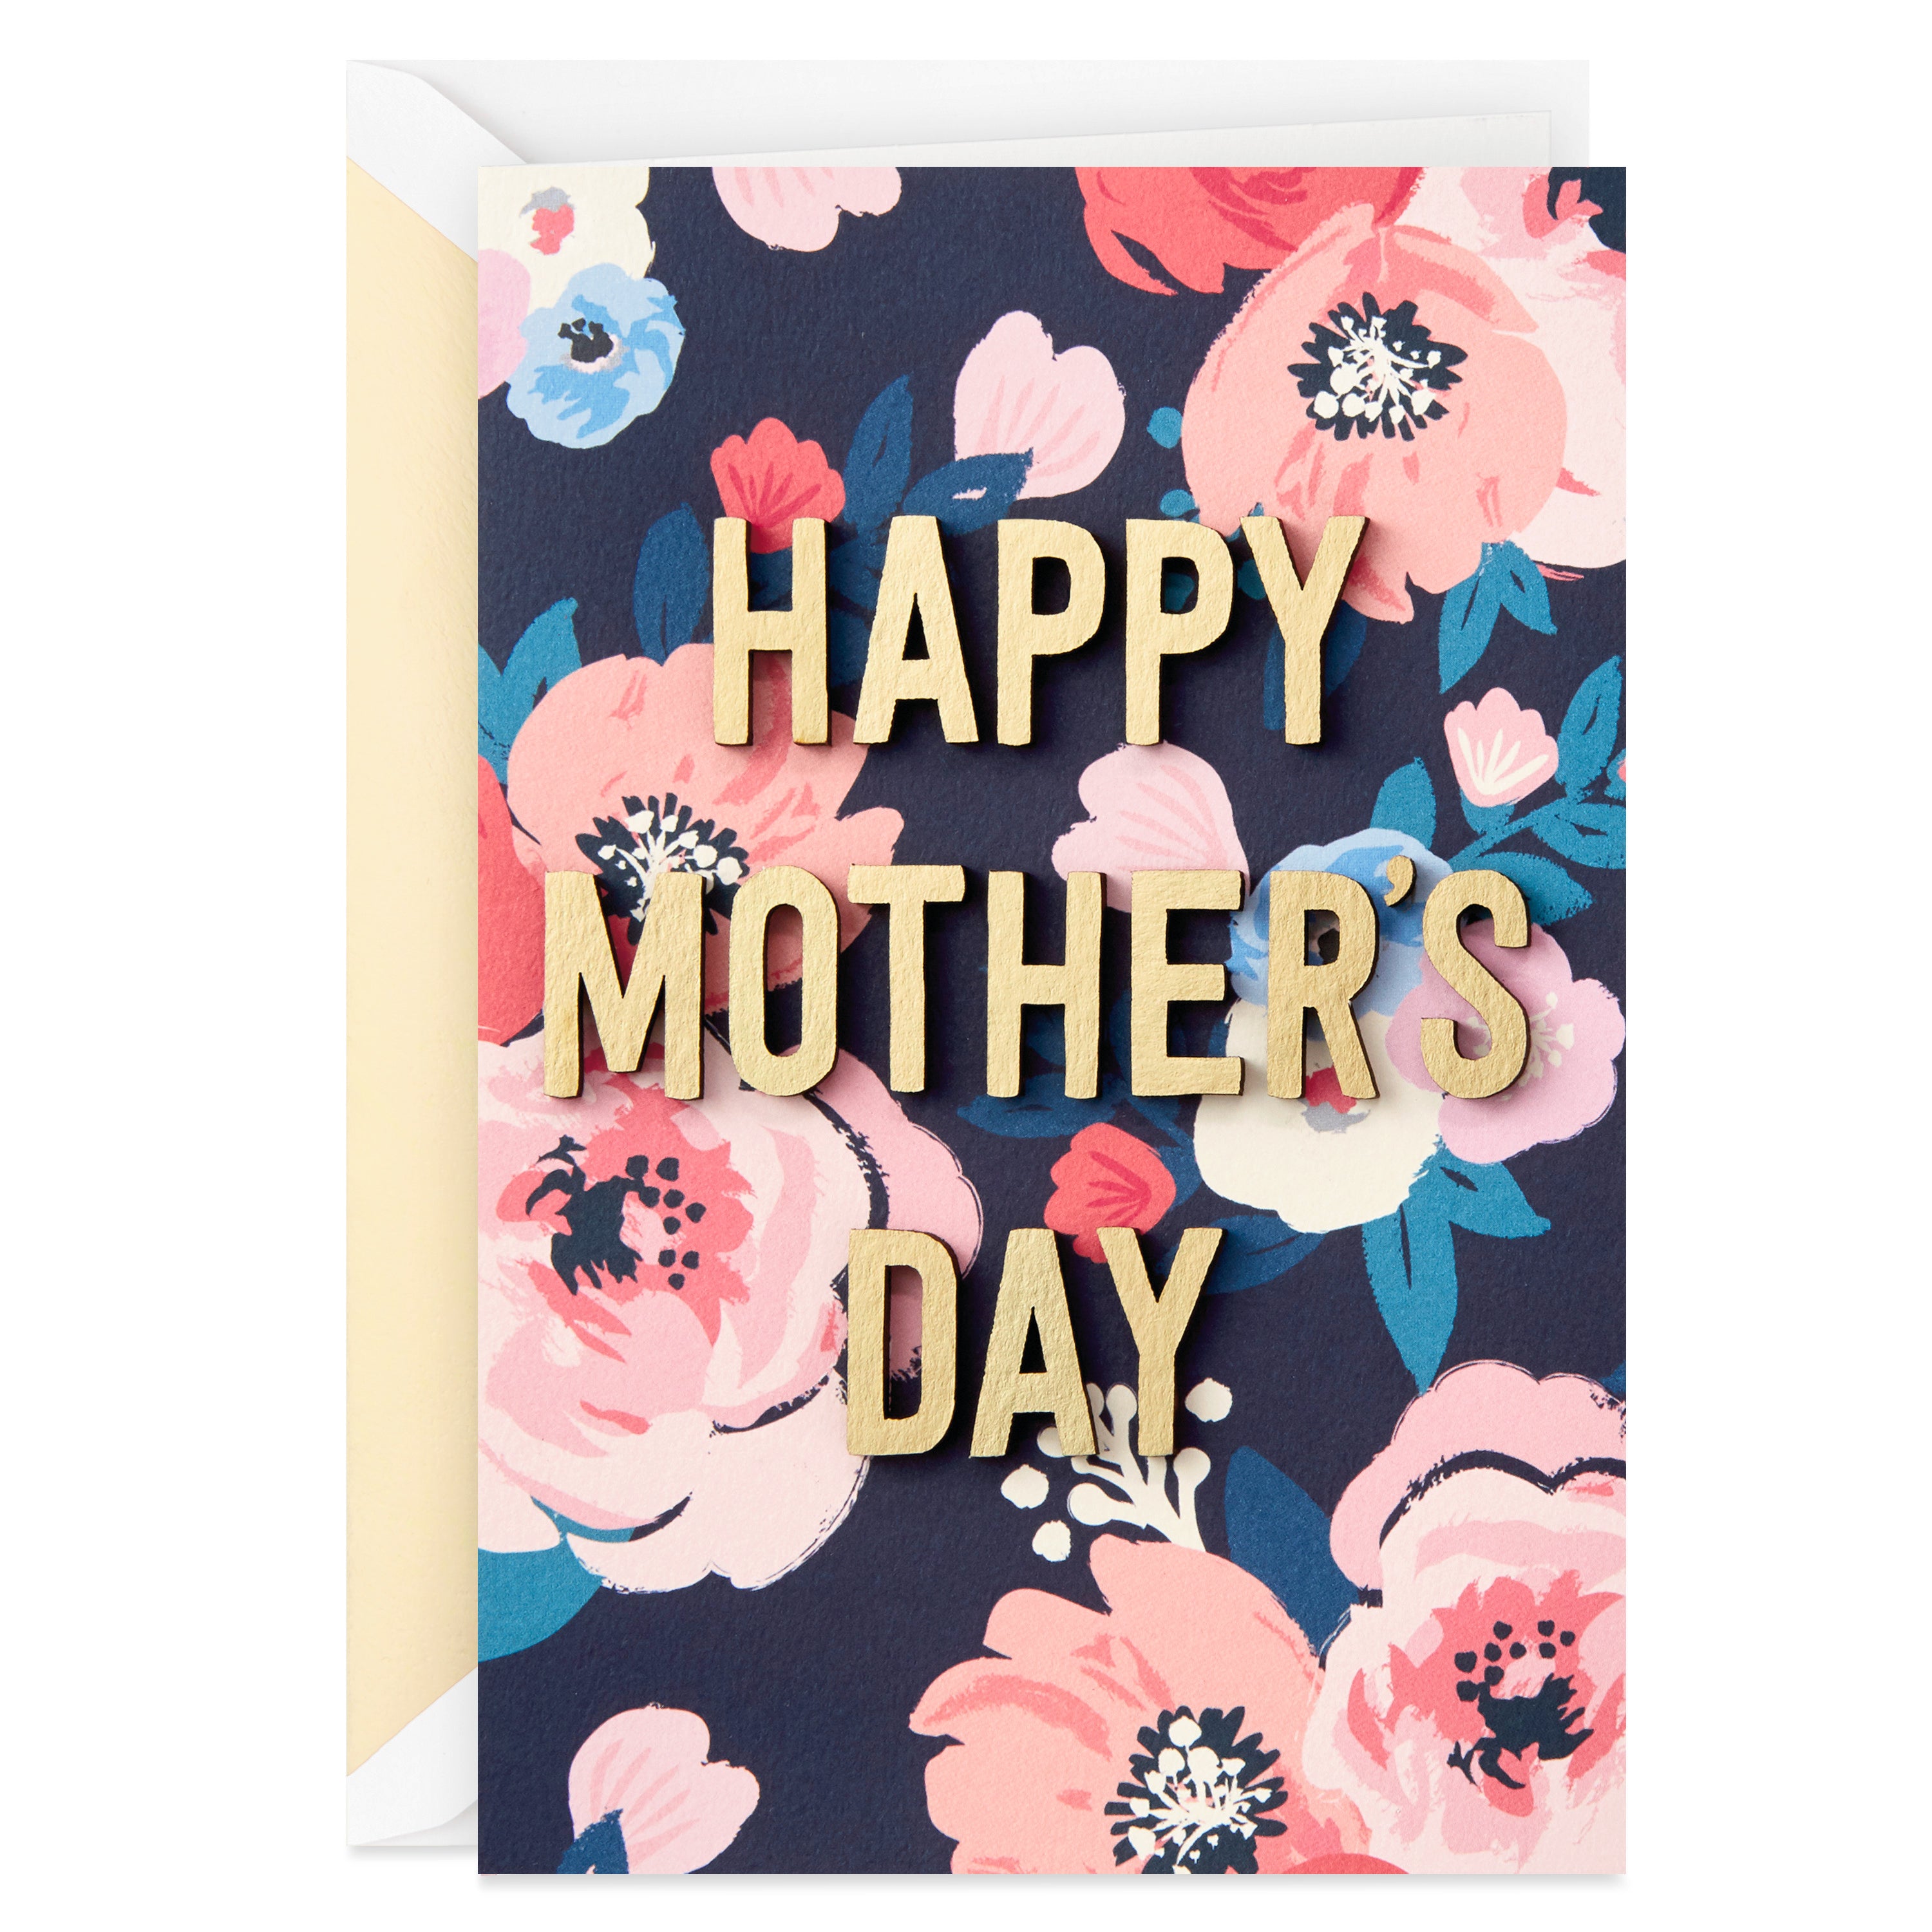 Signature Mothers Day Card (All the Happiness You Bring)